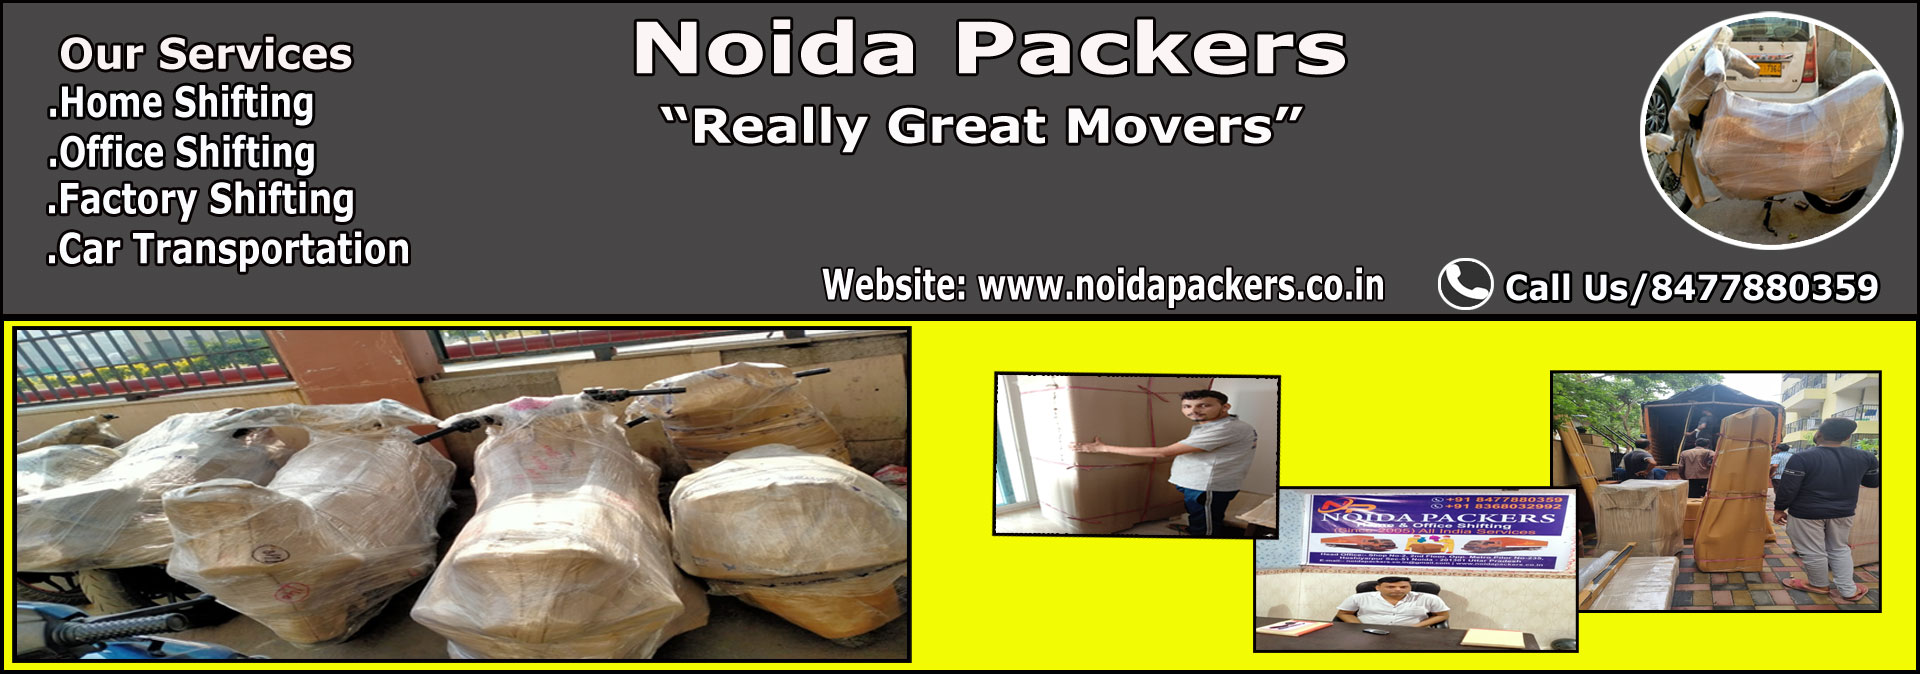 Movers ande Packers Noida Sector 80